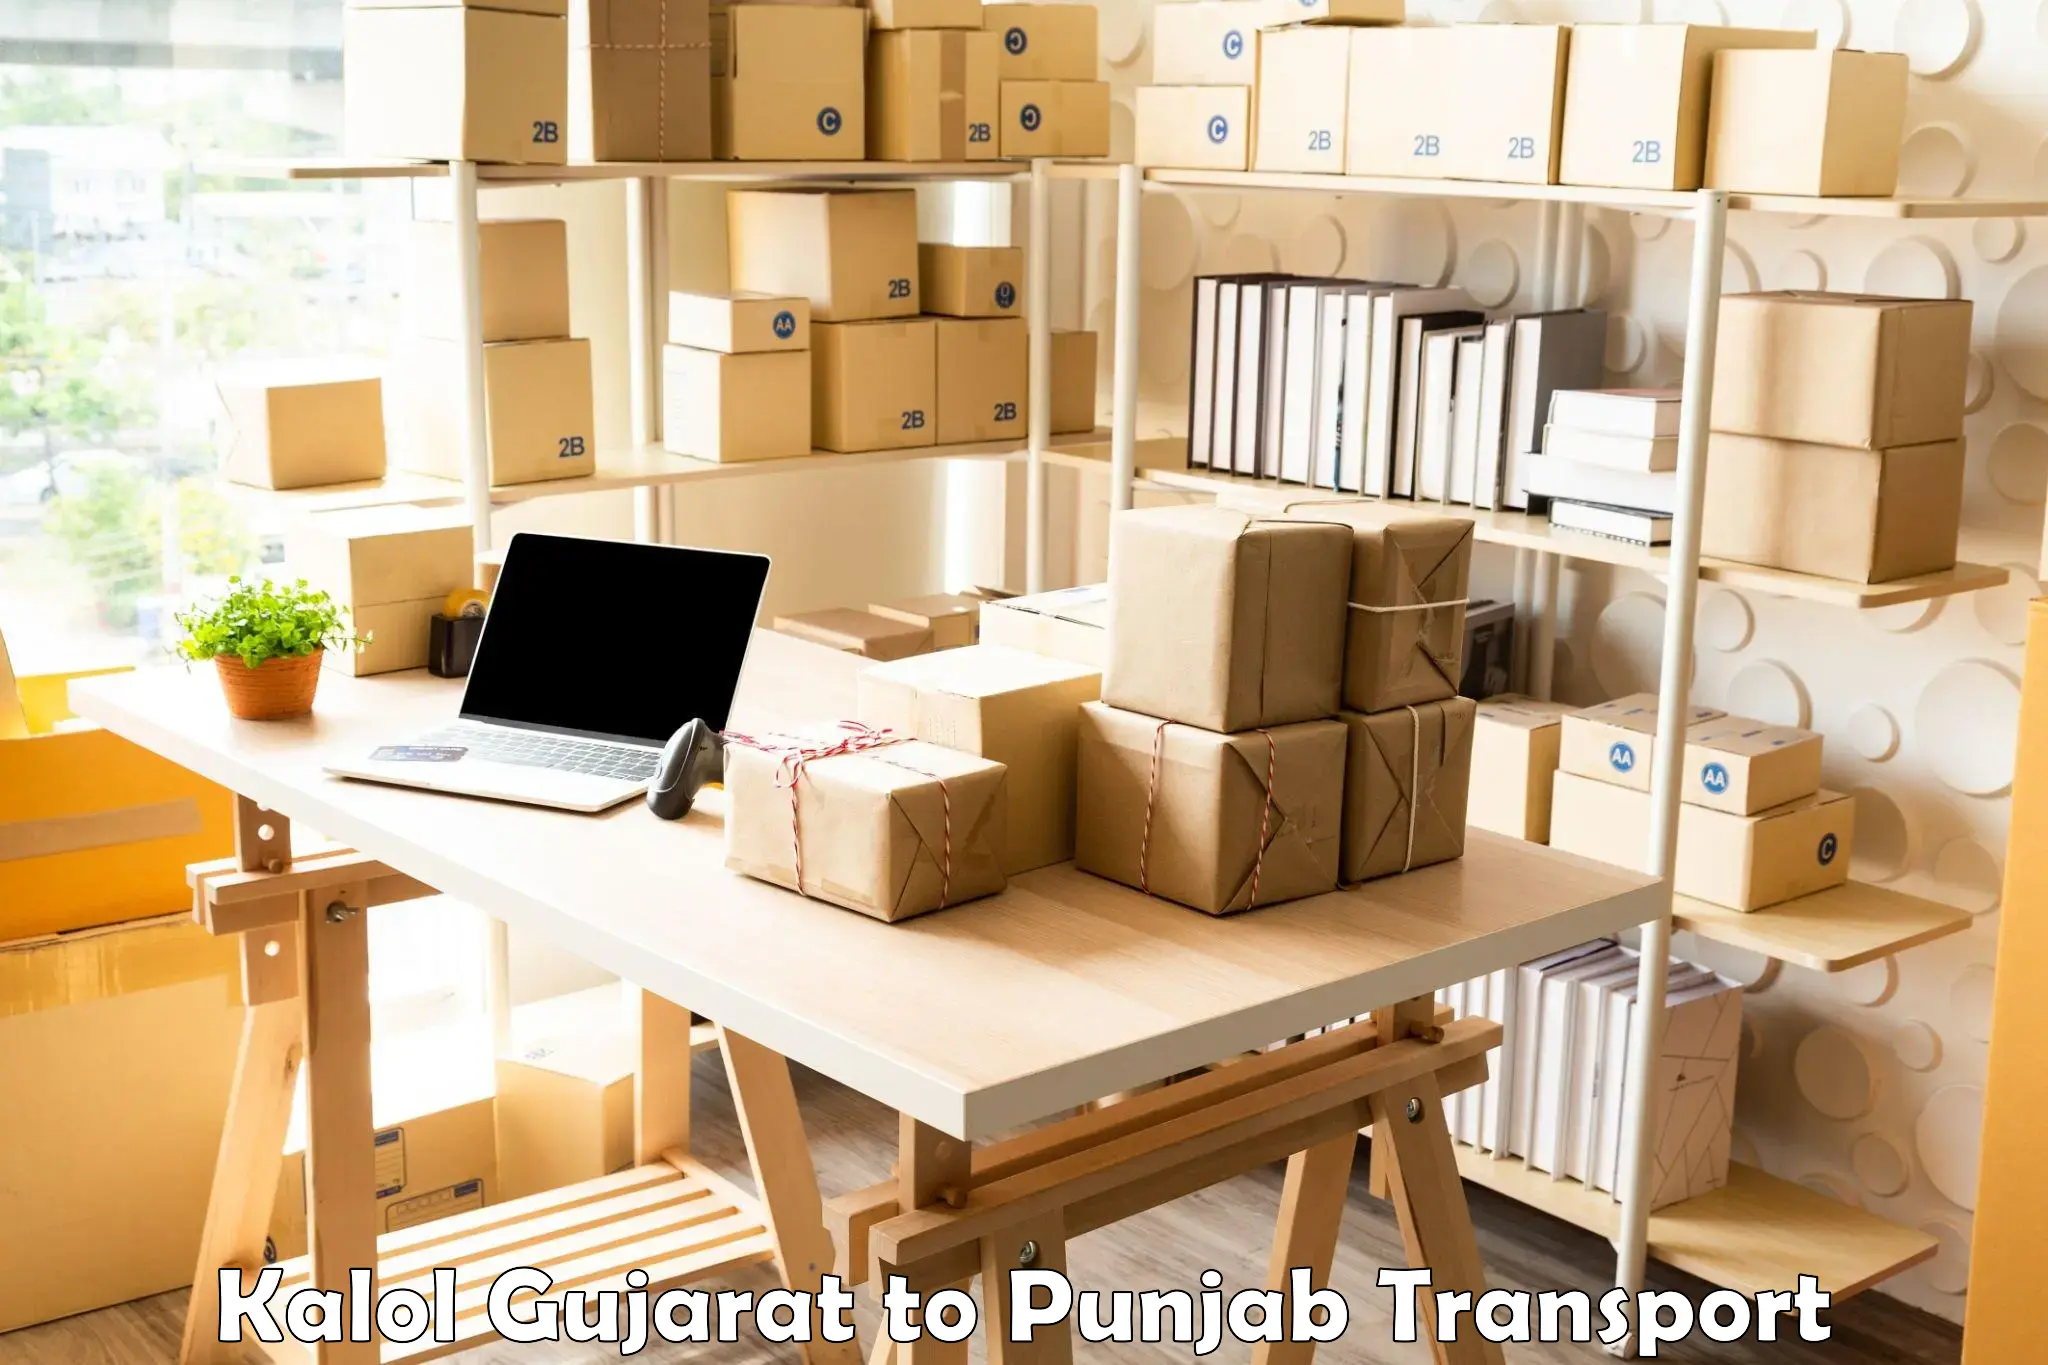 Package delivery services Kalol Gujarat to Goindwal Sahib